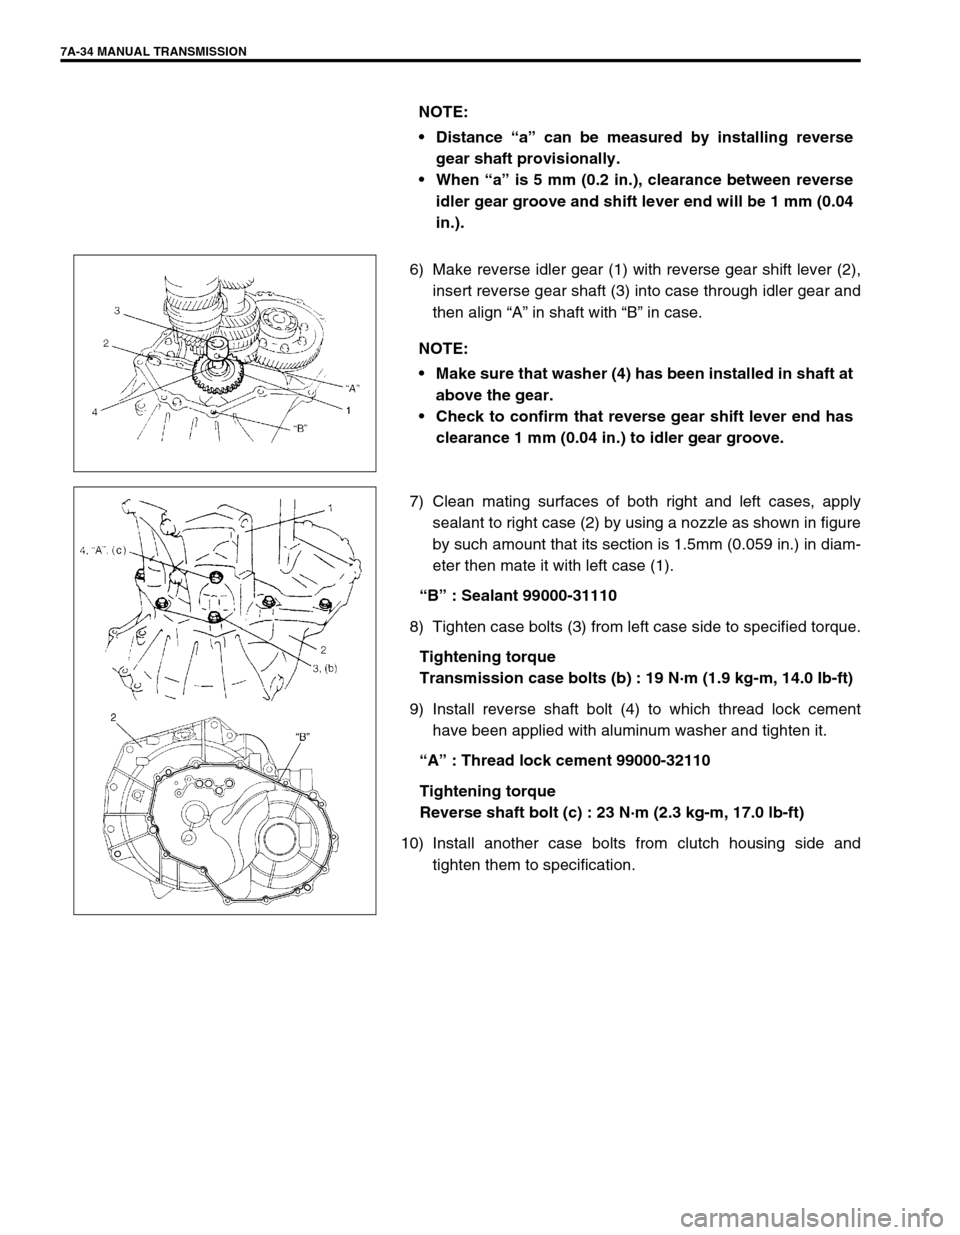 SUZUKI SWIFT 2000 1.G Transmission Service Workshop Manual 7A-34 MANUAL TRANSMISSION
6) Make reverse idler gear (1) with reverse gear shift lever (2),
insert reverse gear shaft (3) into case through idler gear and
then align “A” in shaft with “B” in c